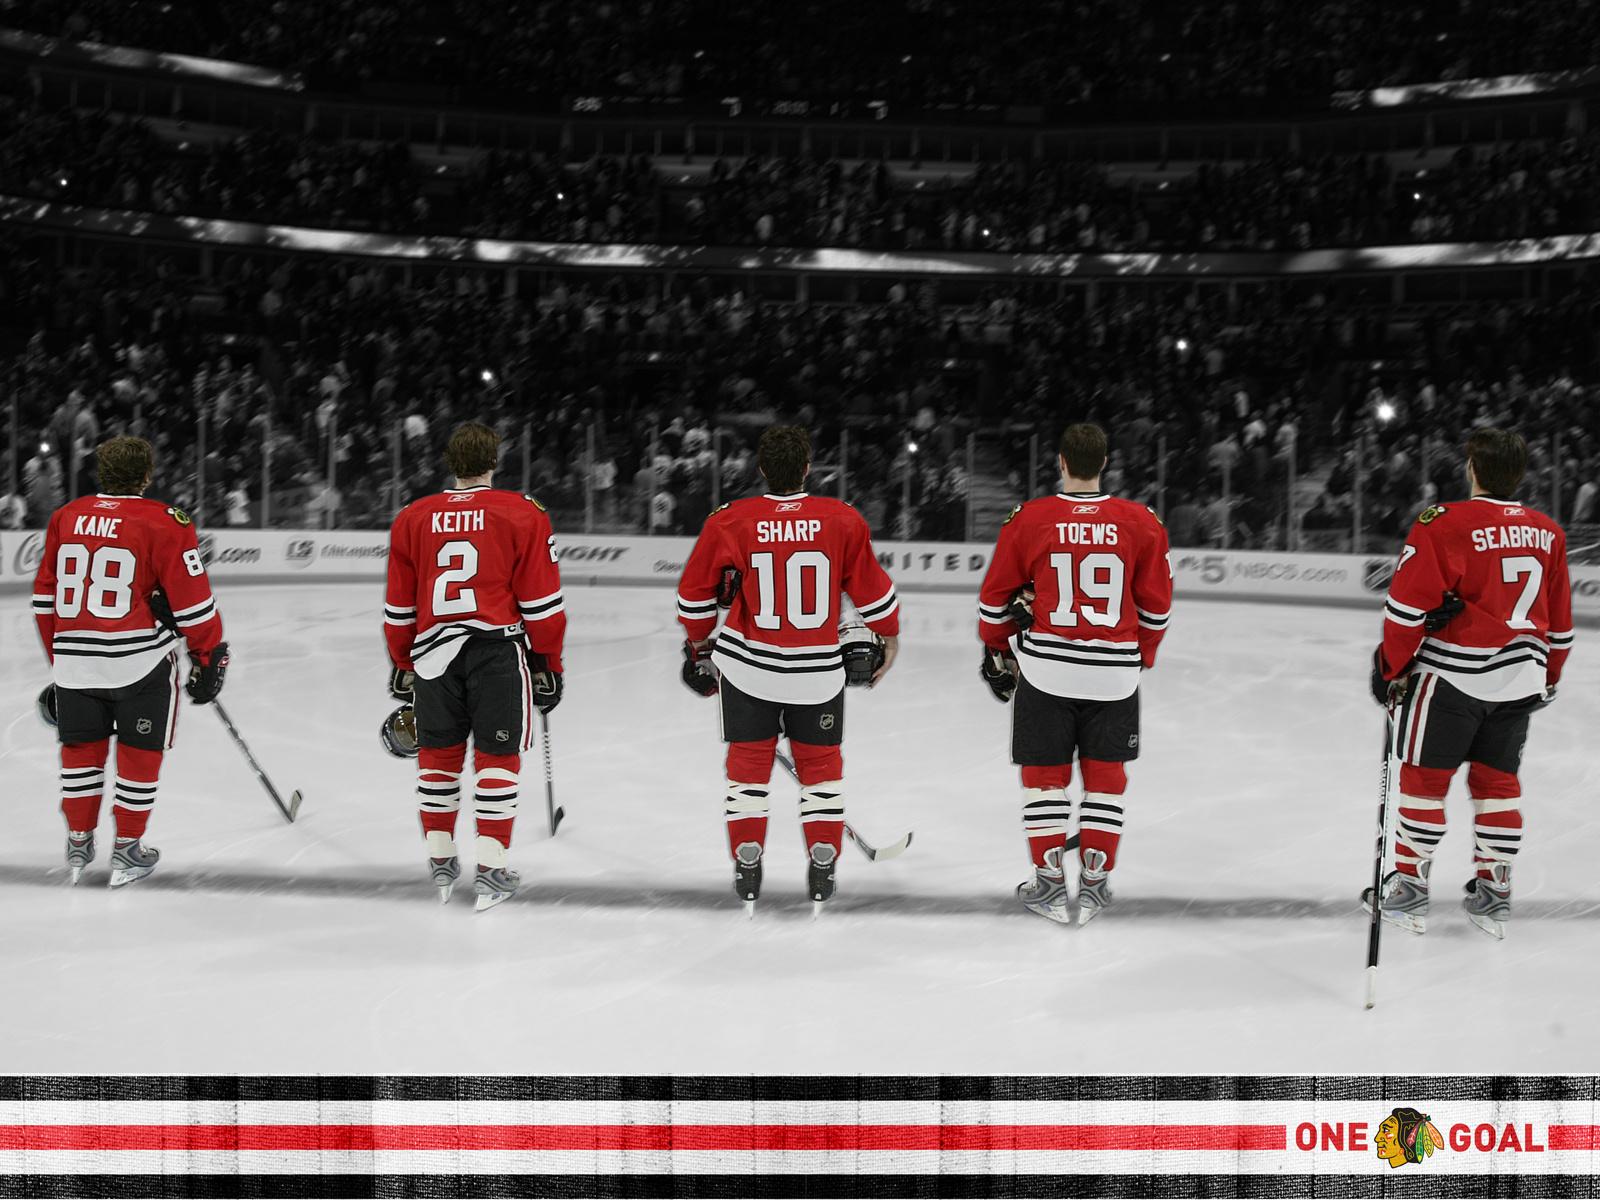 Best Hockey player of Chicago Jonathan Toews and his team wallpaper